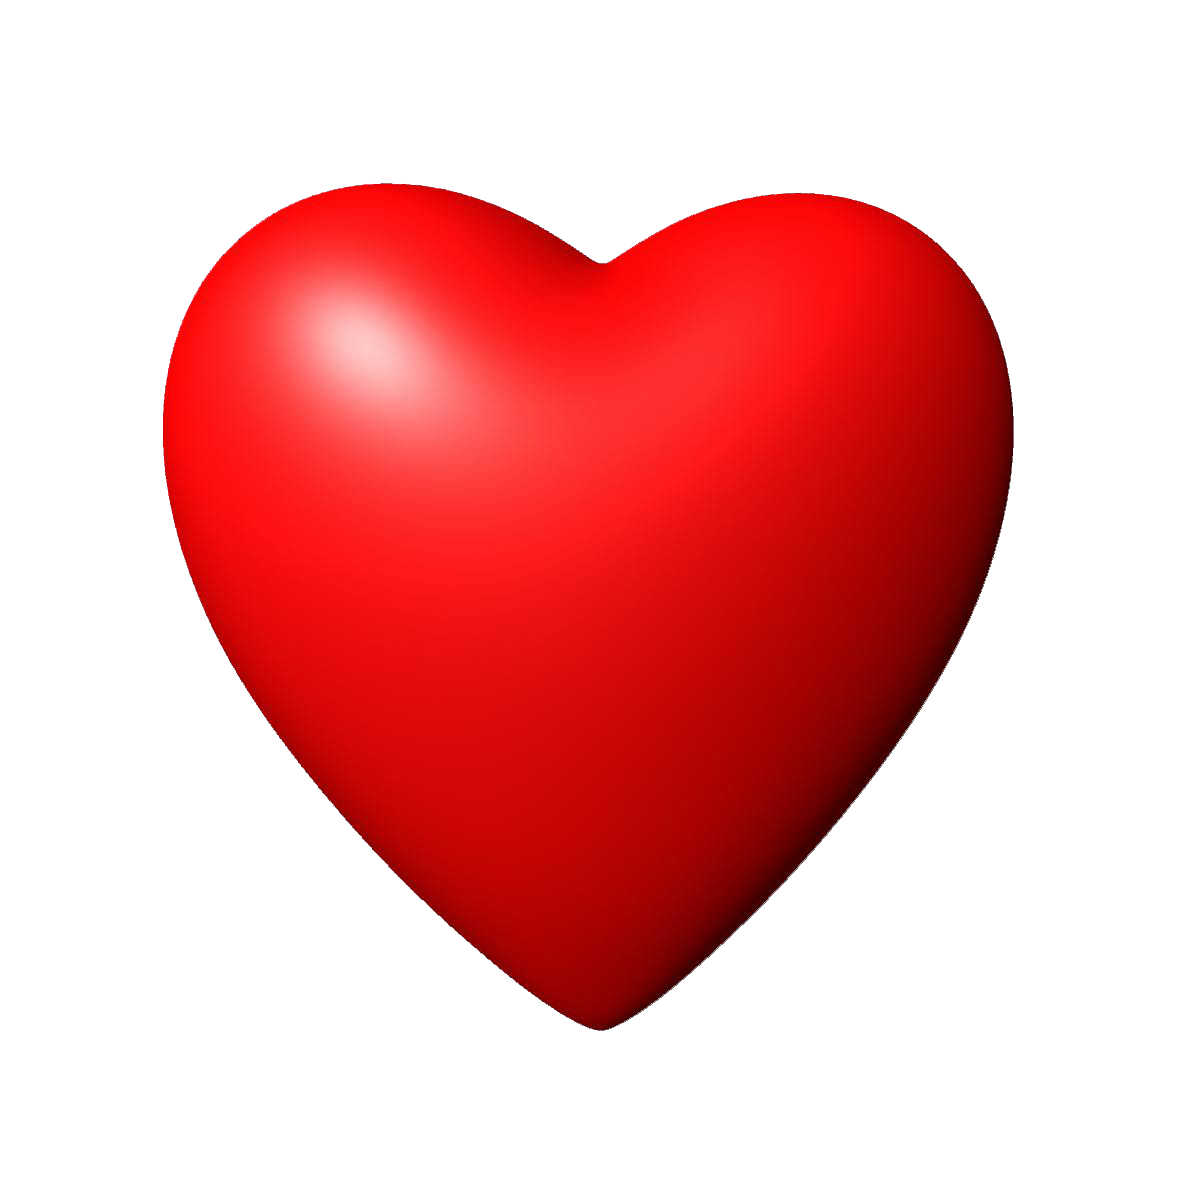 Red Heart Image